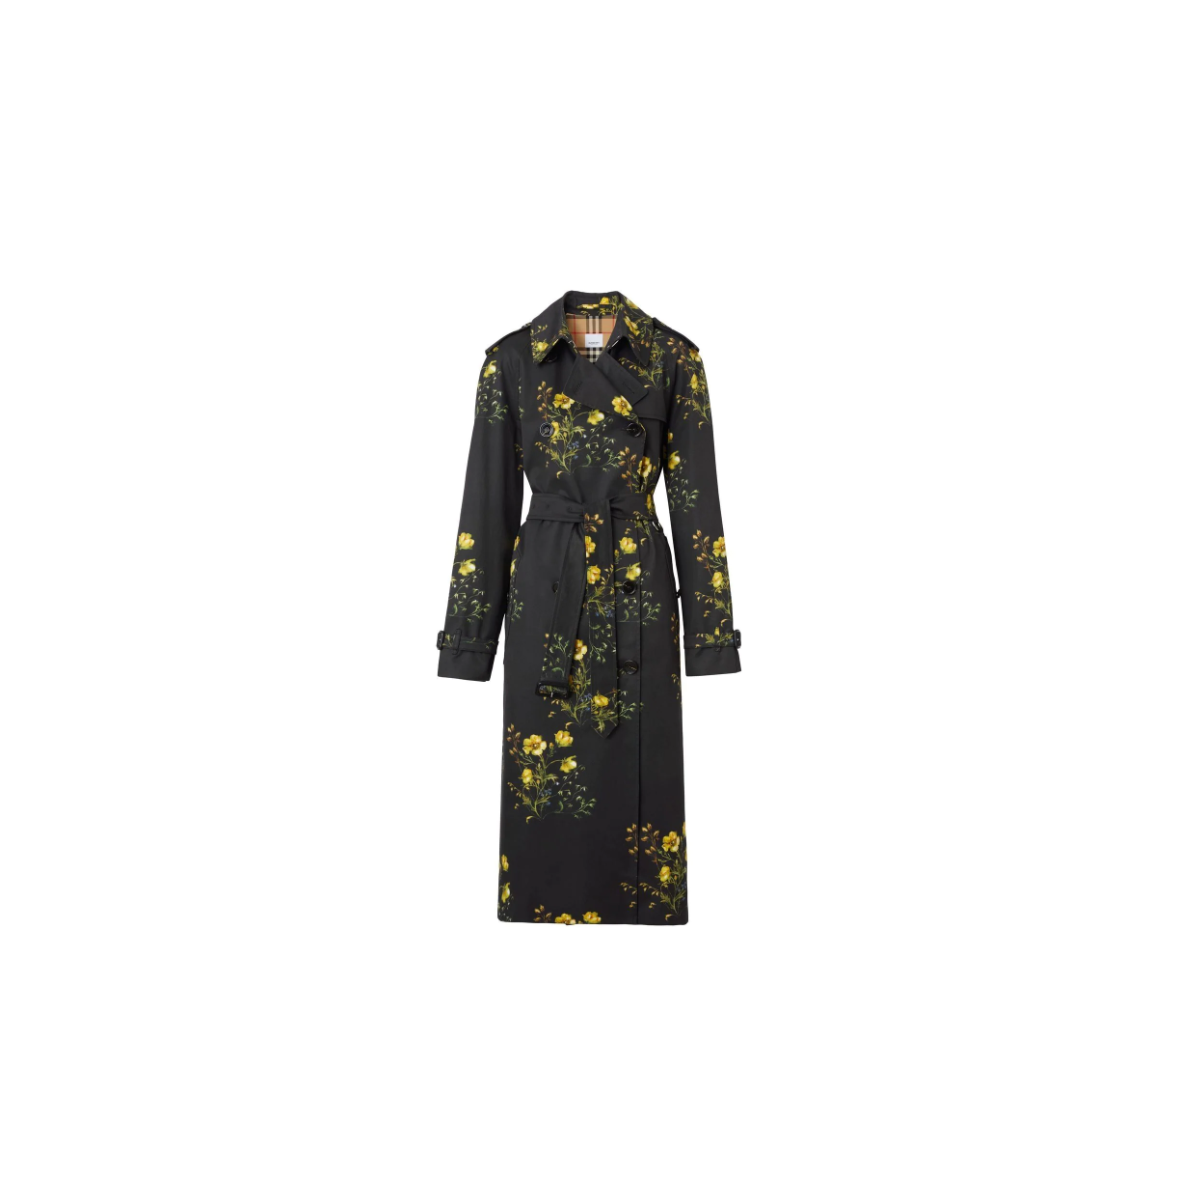 Burberry Black Cotton Waterloo Floral Print Trench Coat